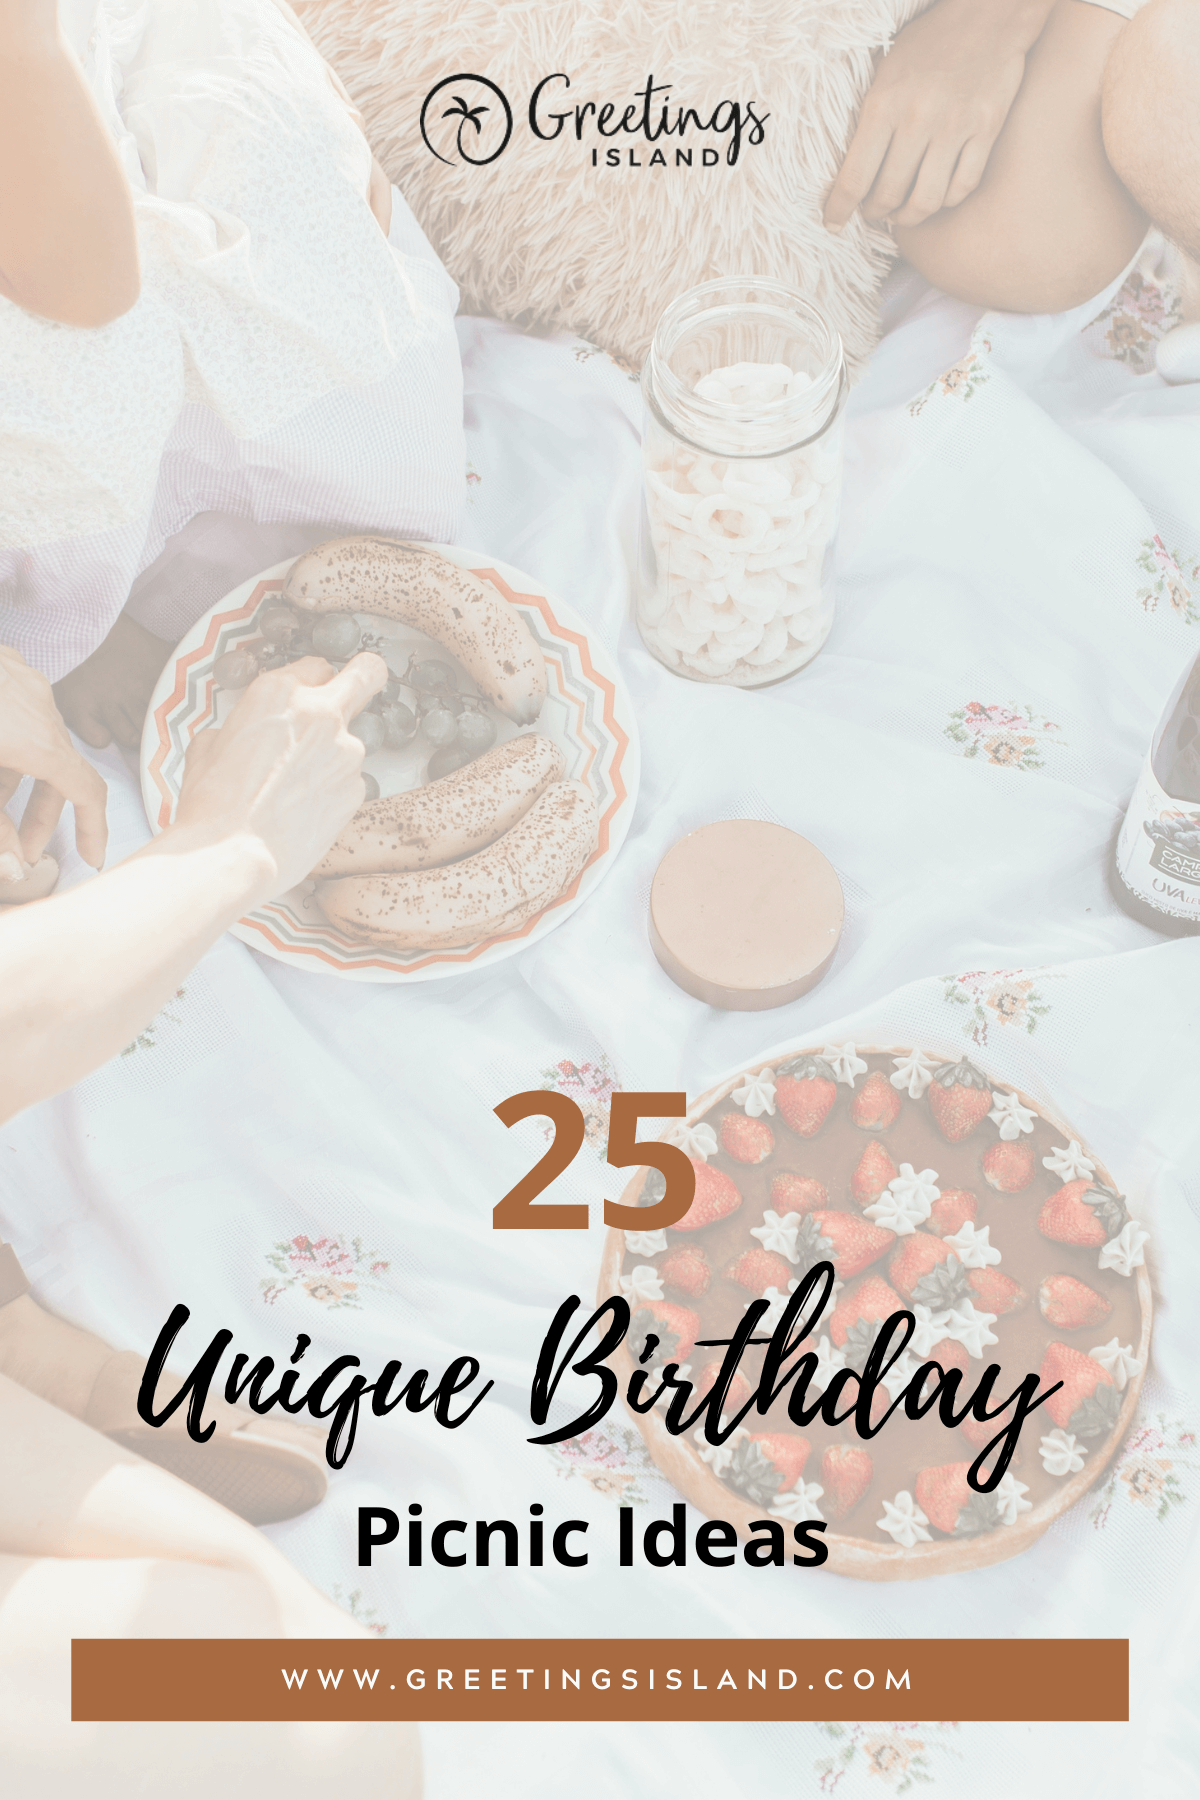 25 Unique Birthday Picnic Ideas That Will Make Your Party Stand Out blog post Pinterest banner